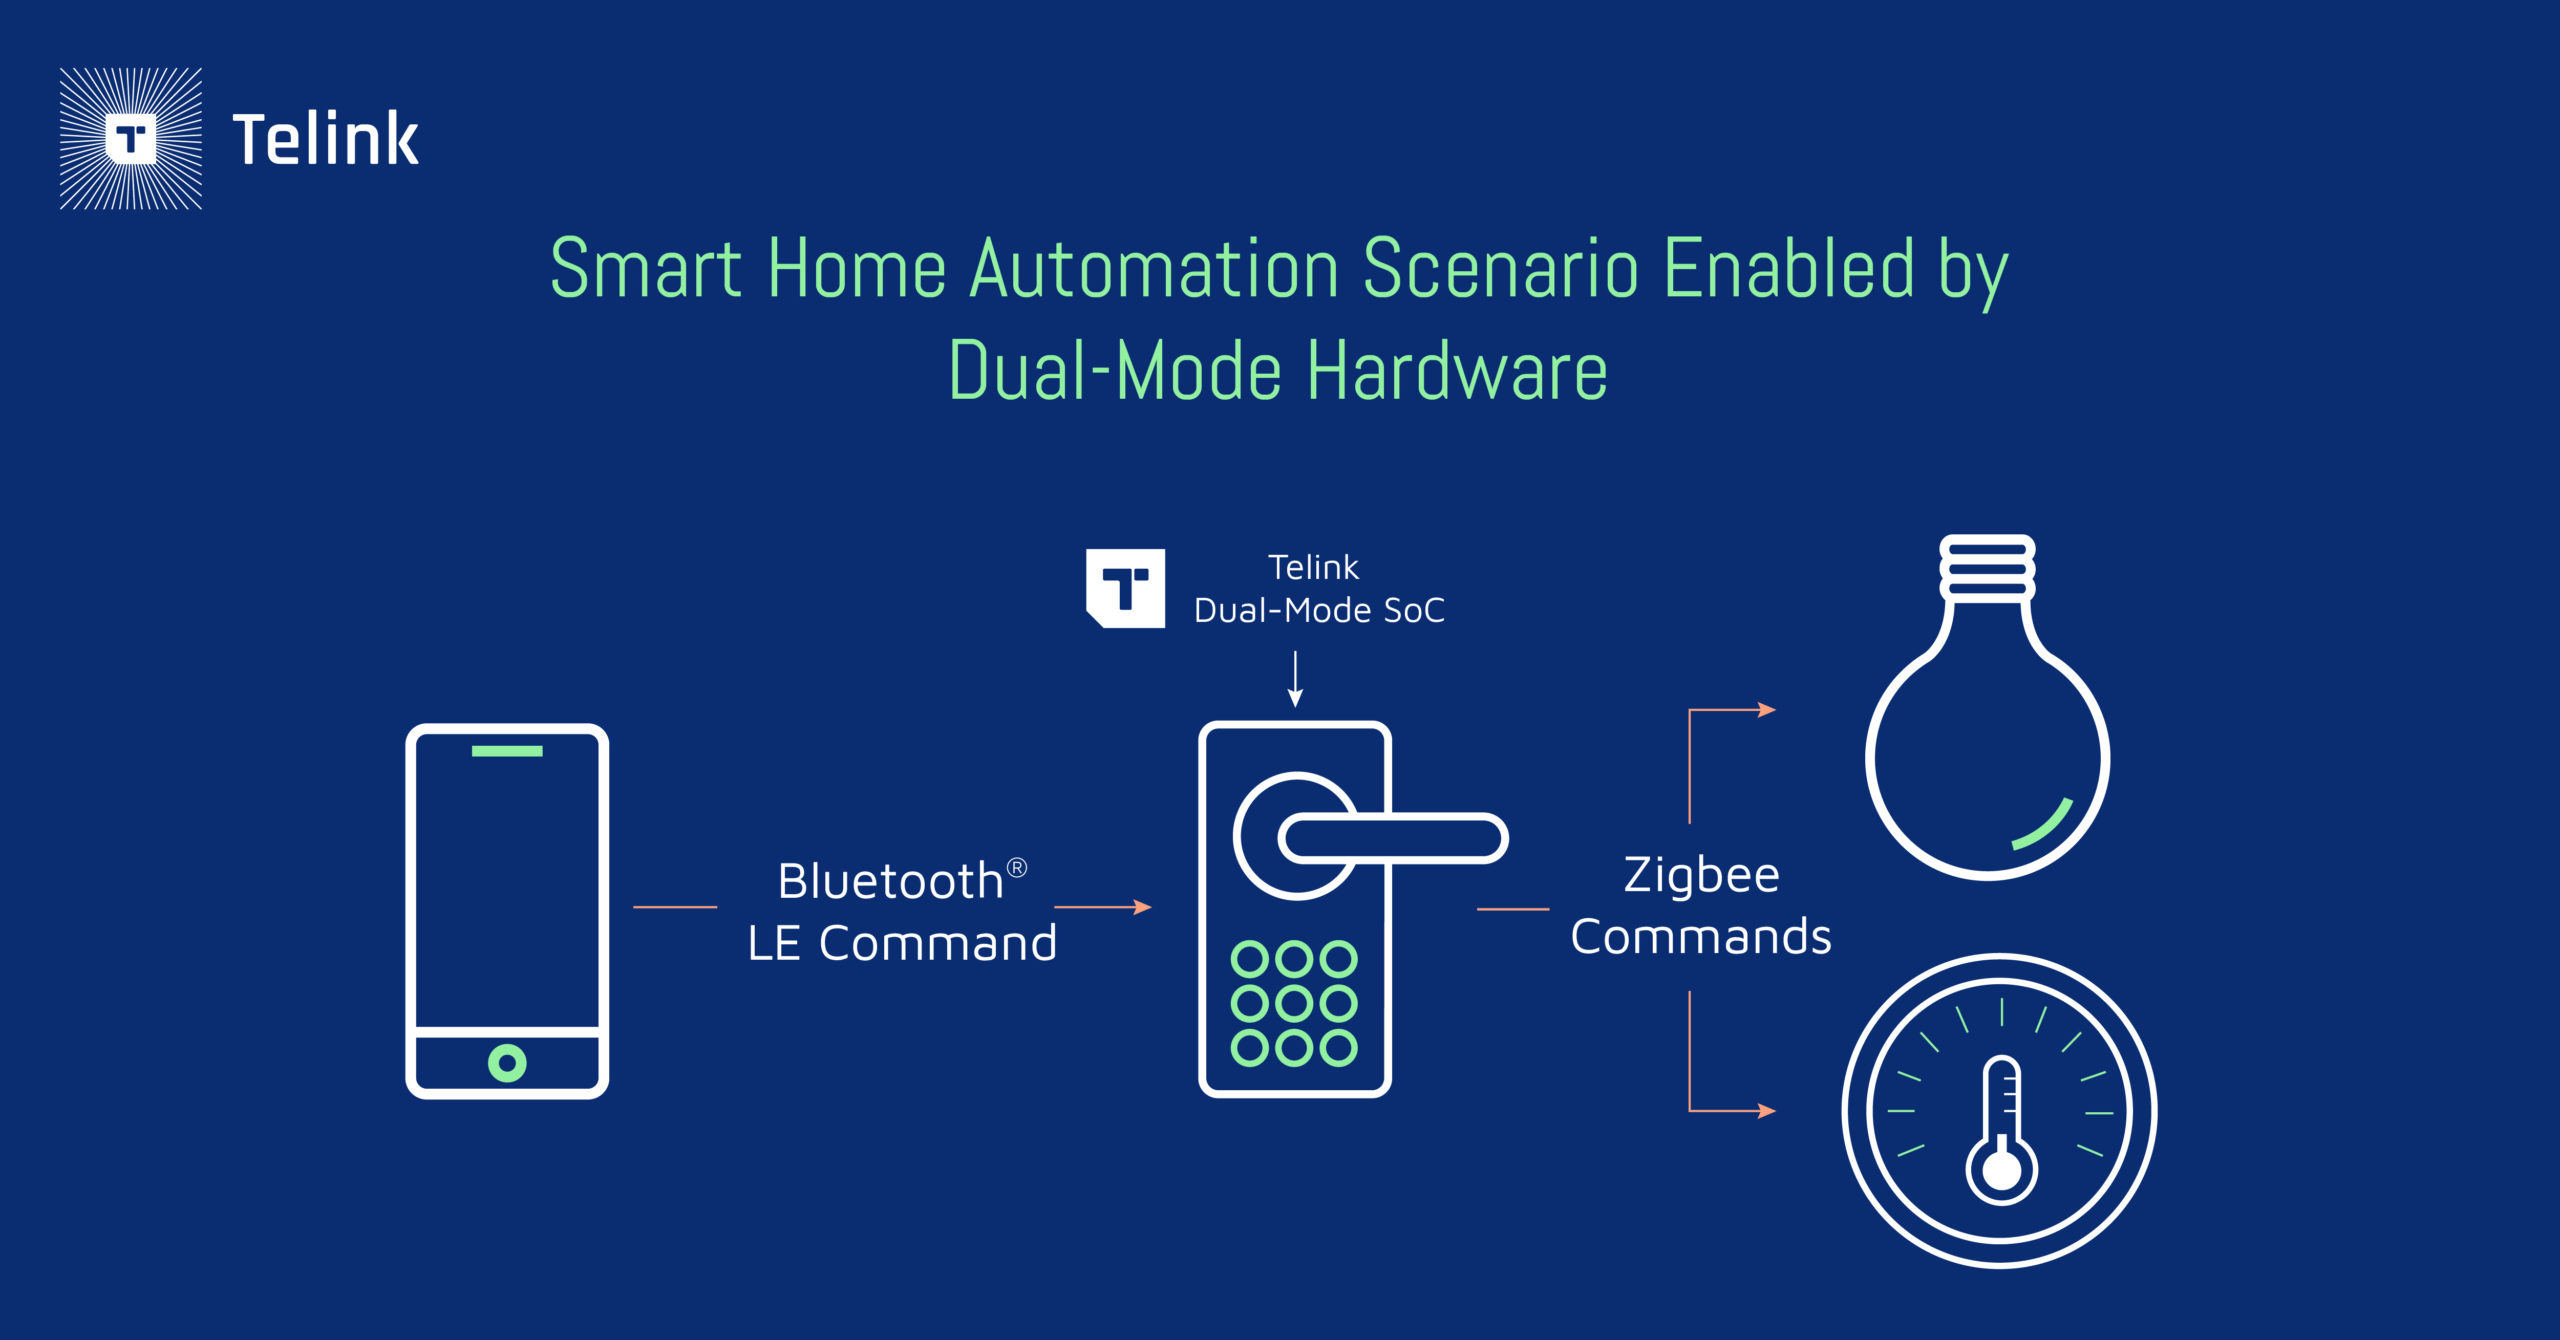 Smart home automation scenario enabled by dual-mode hardware